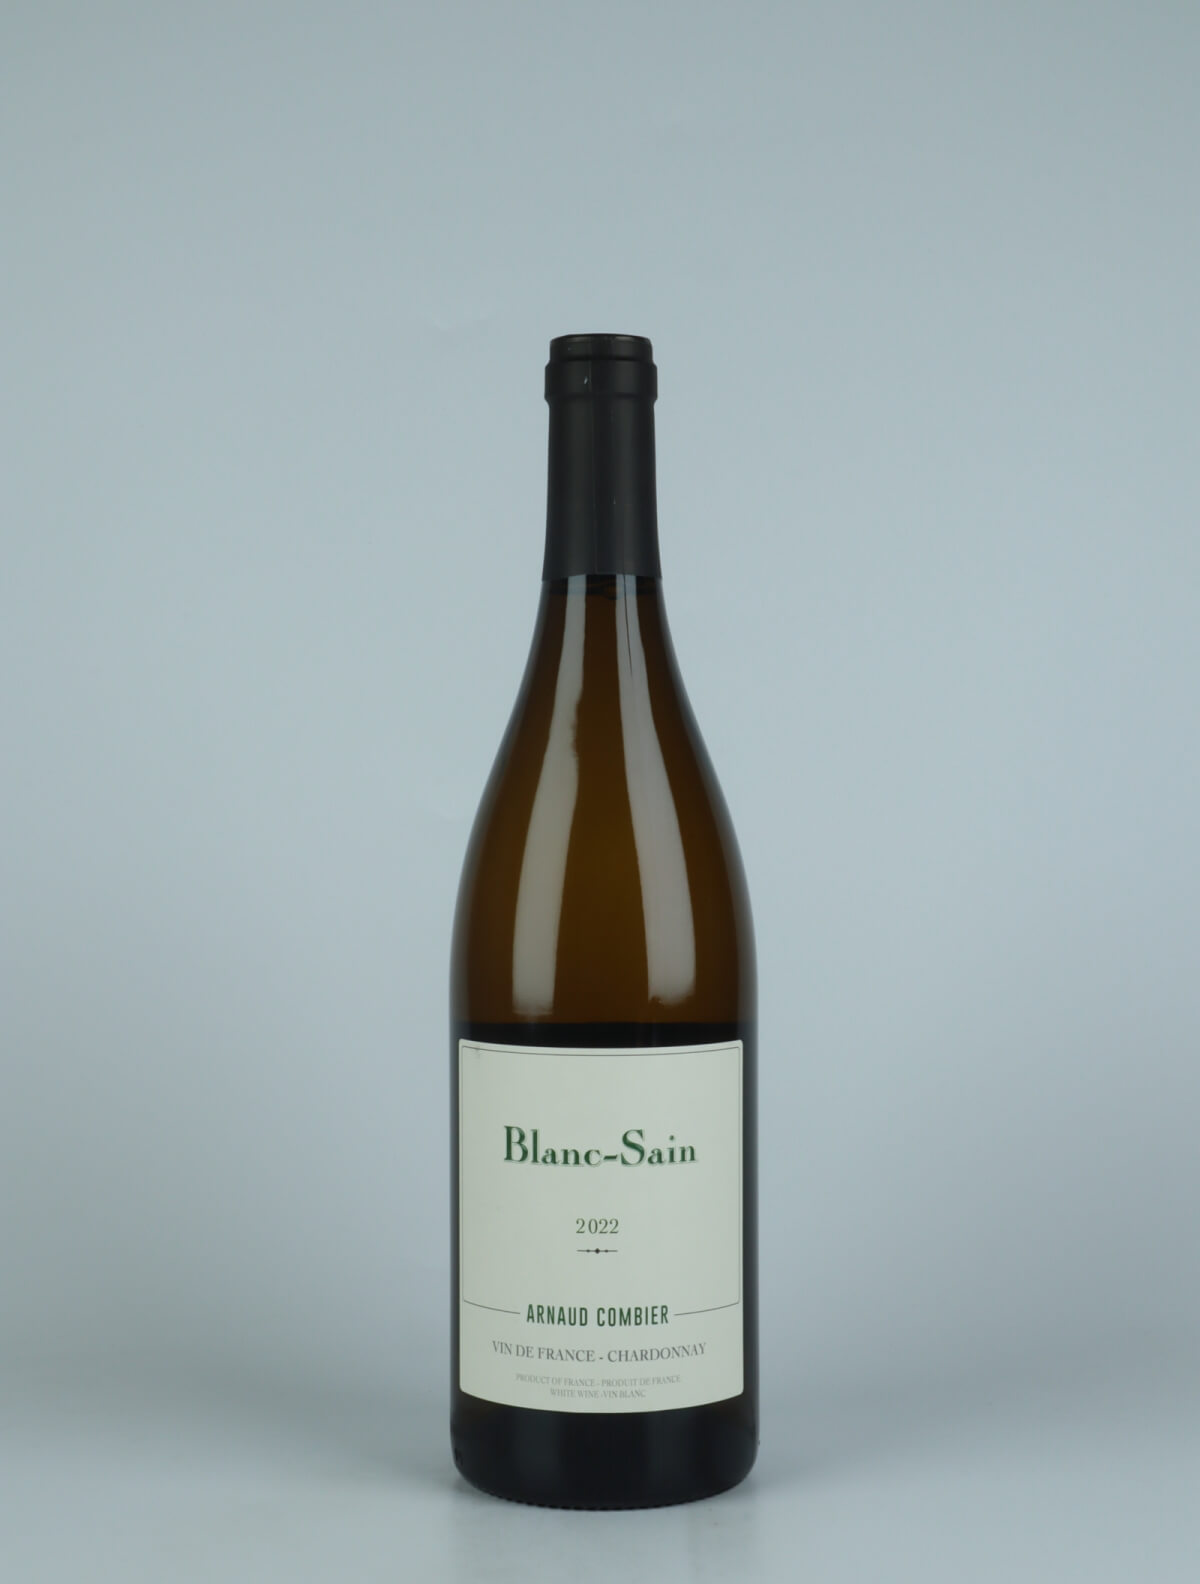 A bottle 2022 Blanc-Sain White wine from Arnaud Combier, Languedoc in France